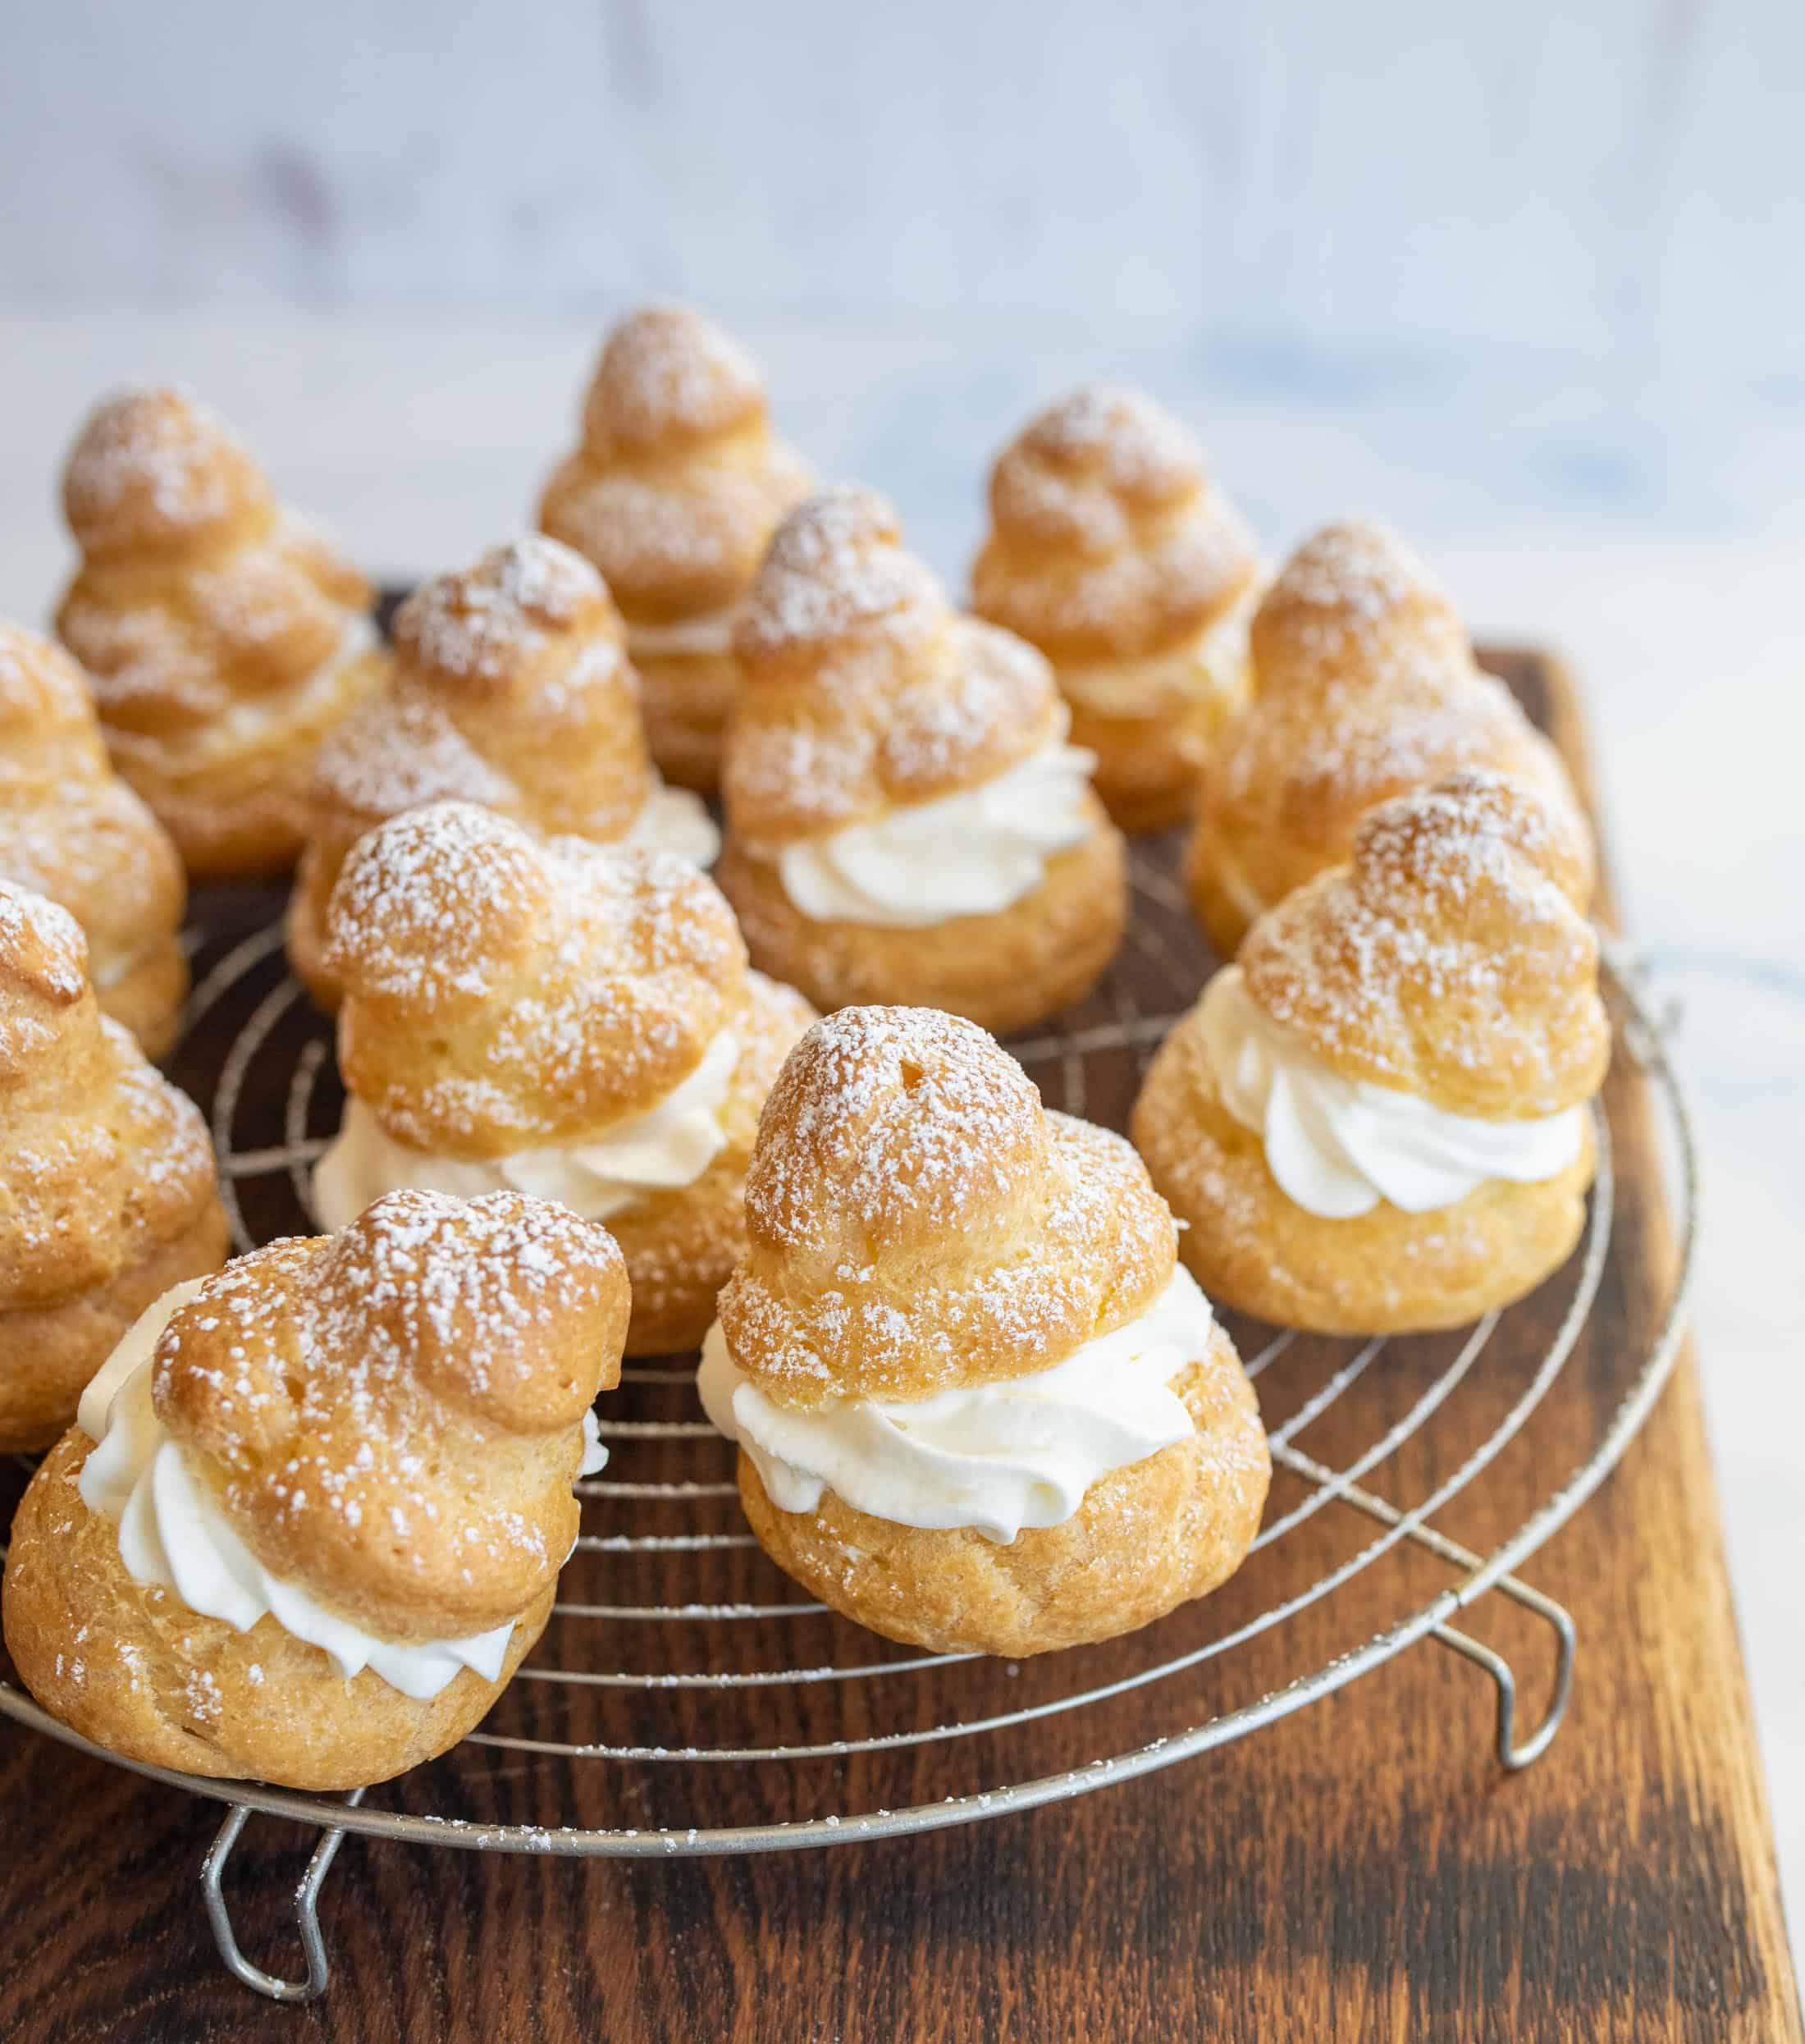 How to Make Cream Puffs - Video & Step by Step Photos